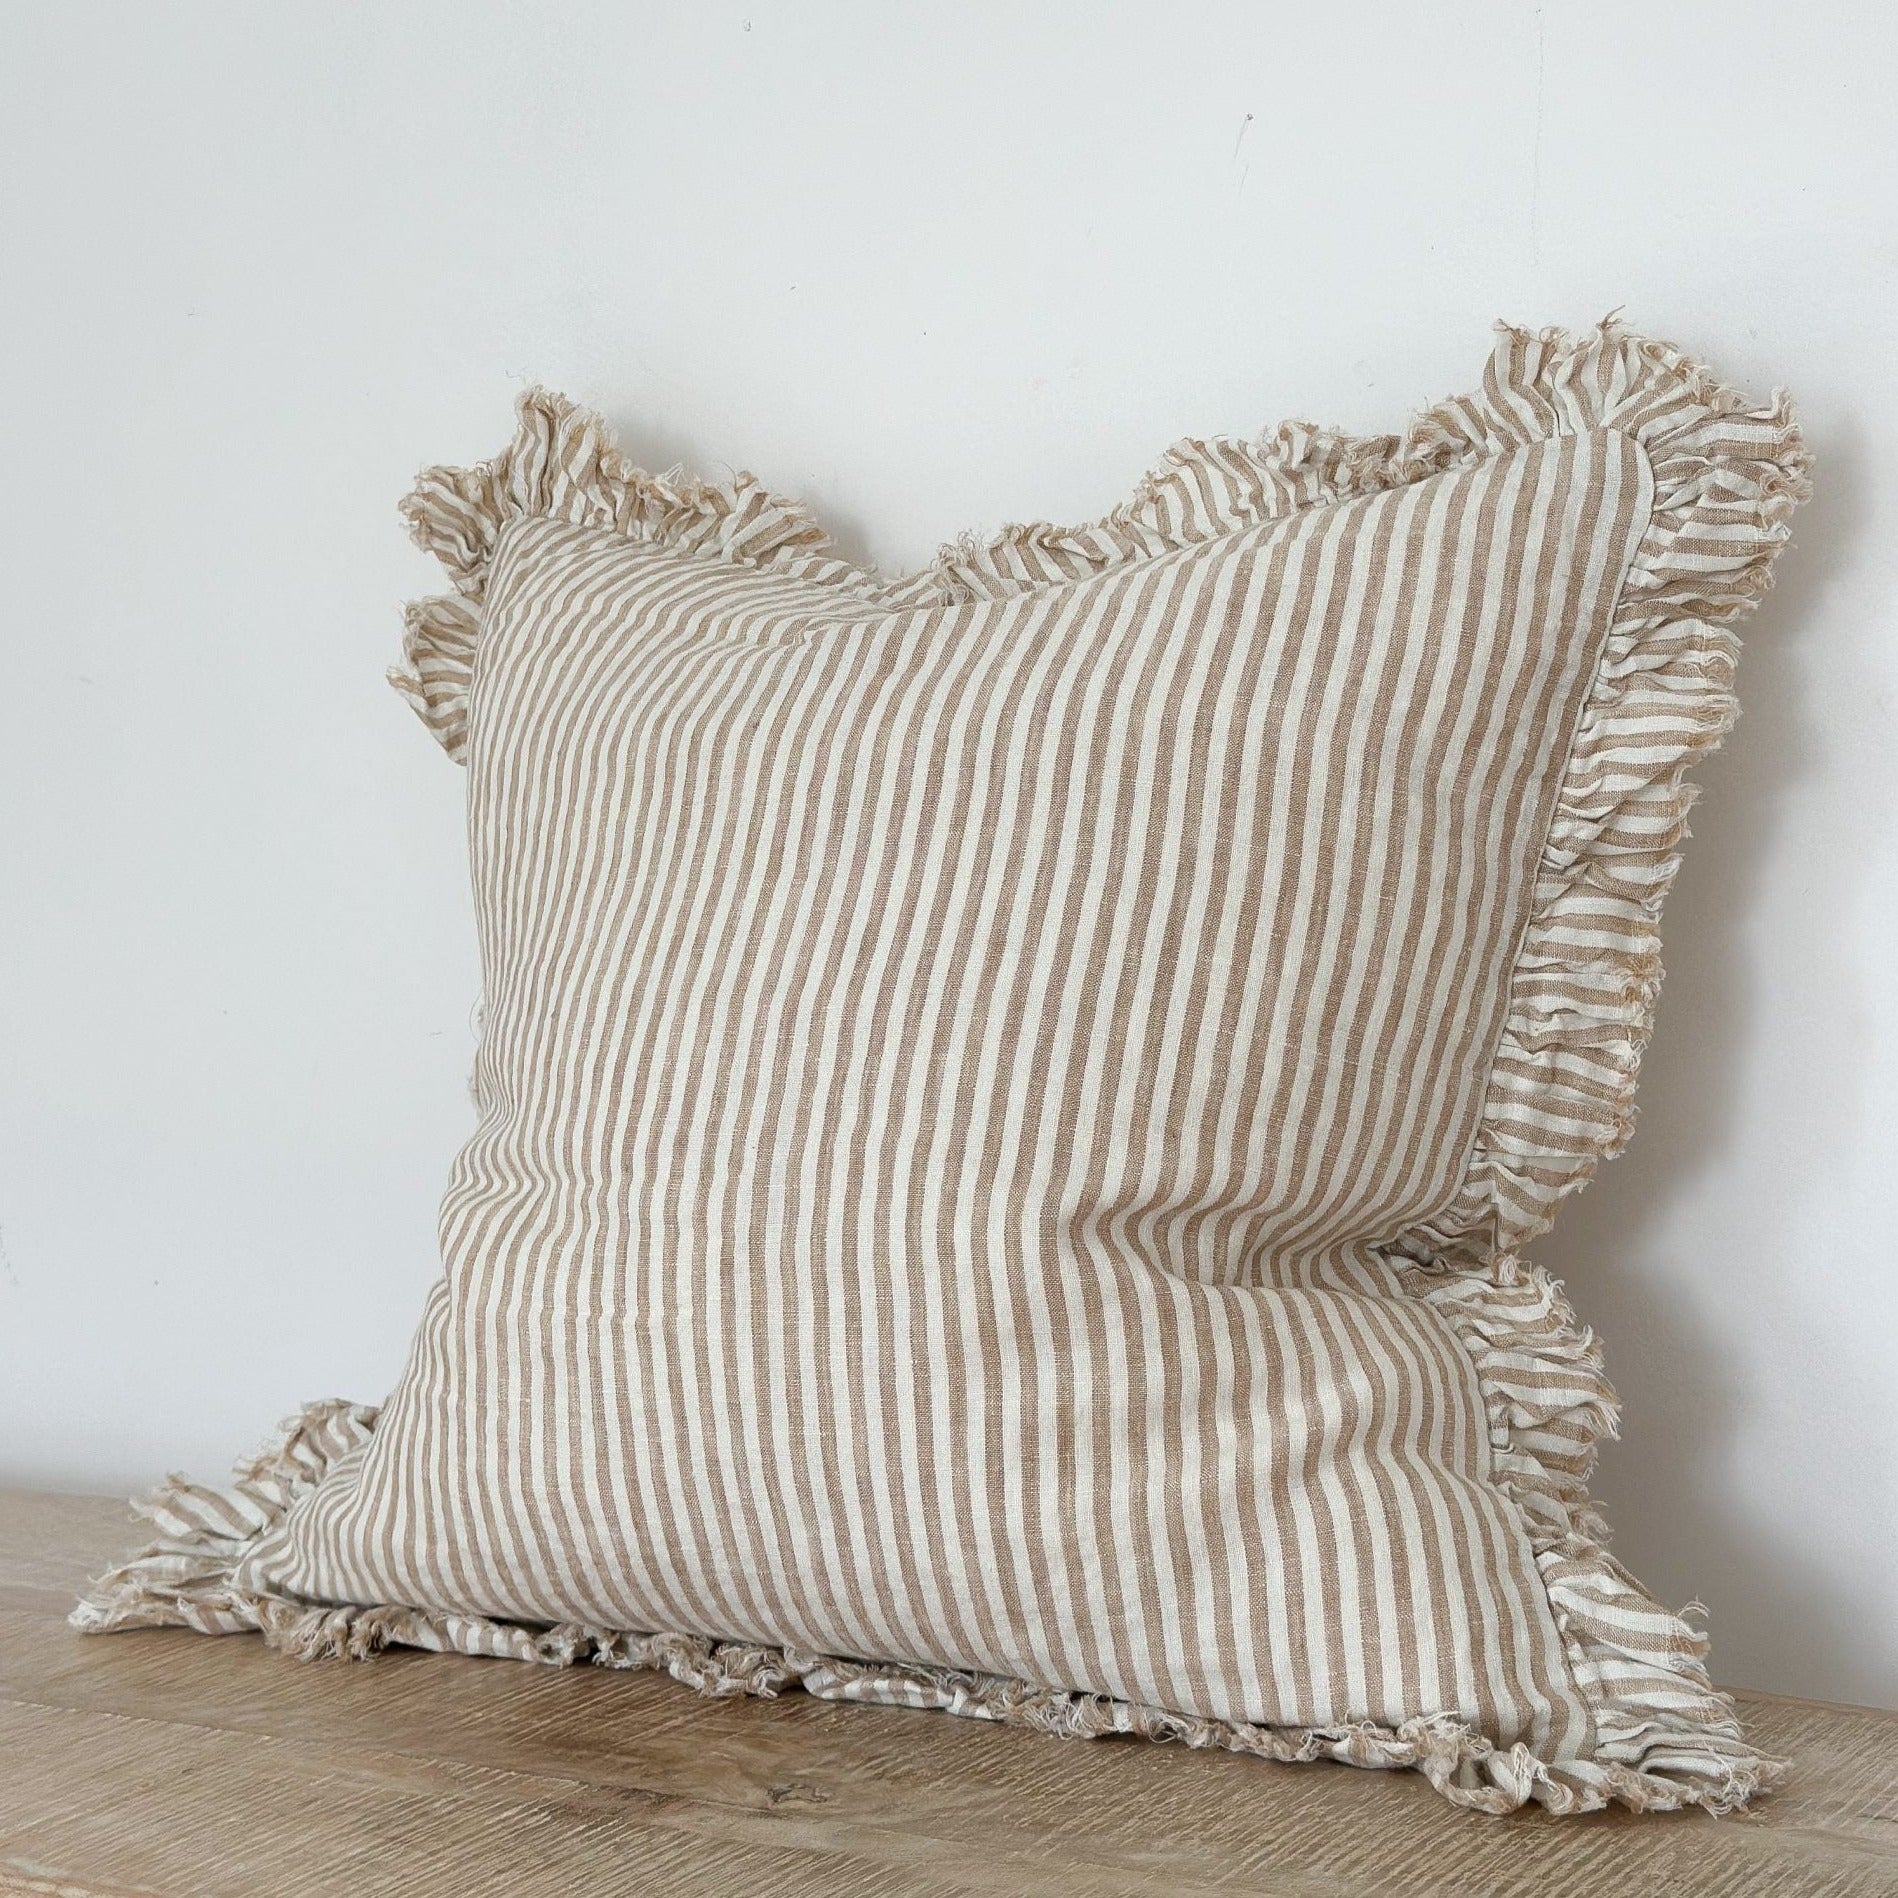 Light brown striped cushion with ruffled frayed edge.